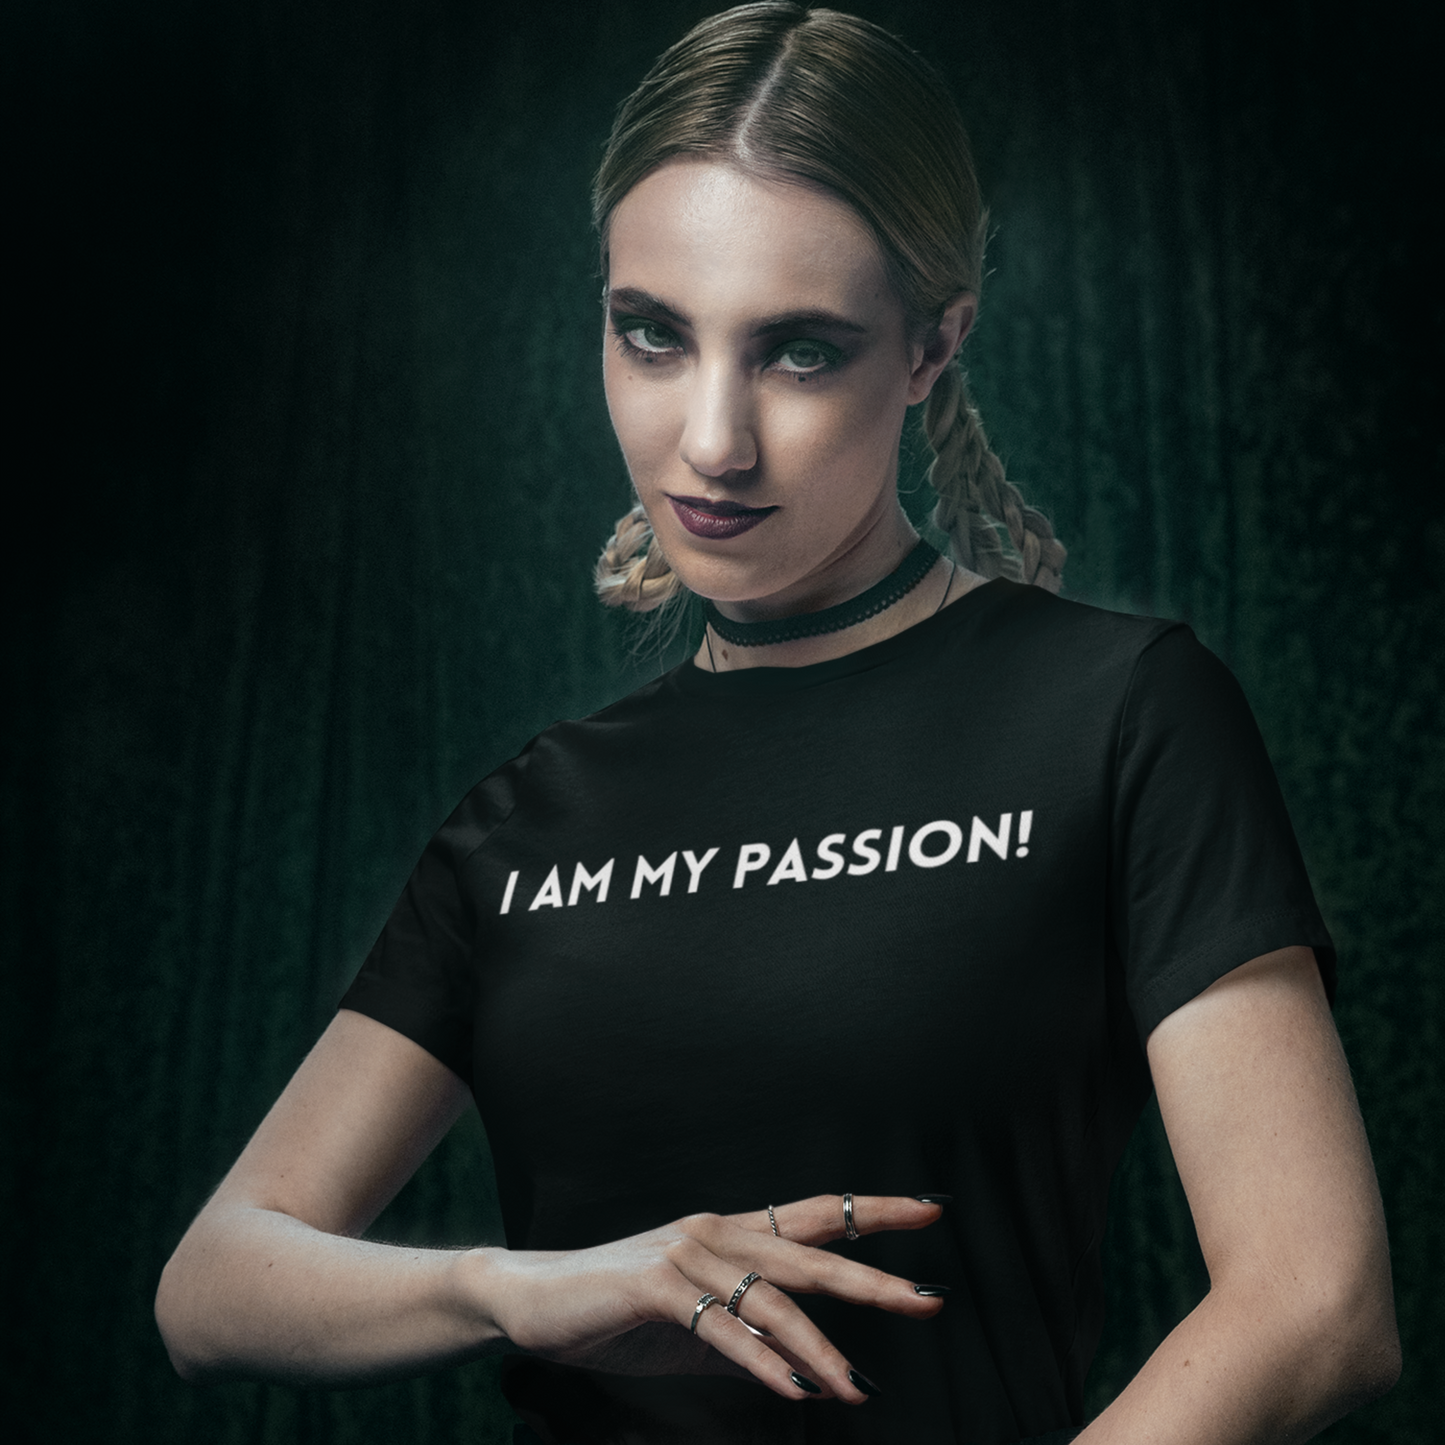 I am my passion unisex t shirt inspirational words t shirts t shirt gift for friends gift for family self affirming words on a shirt